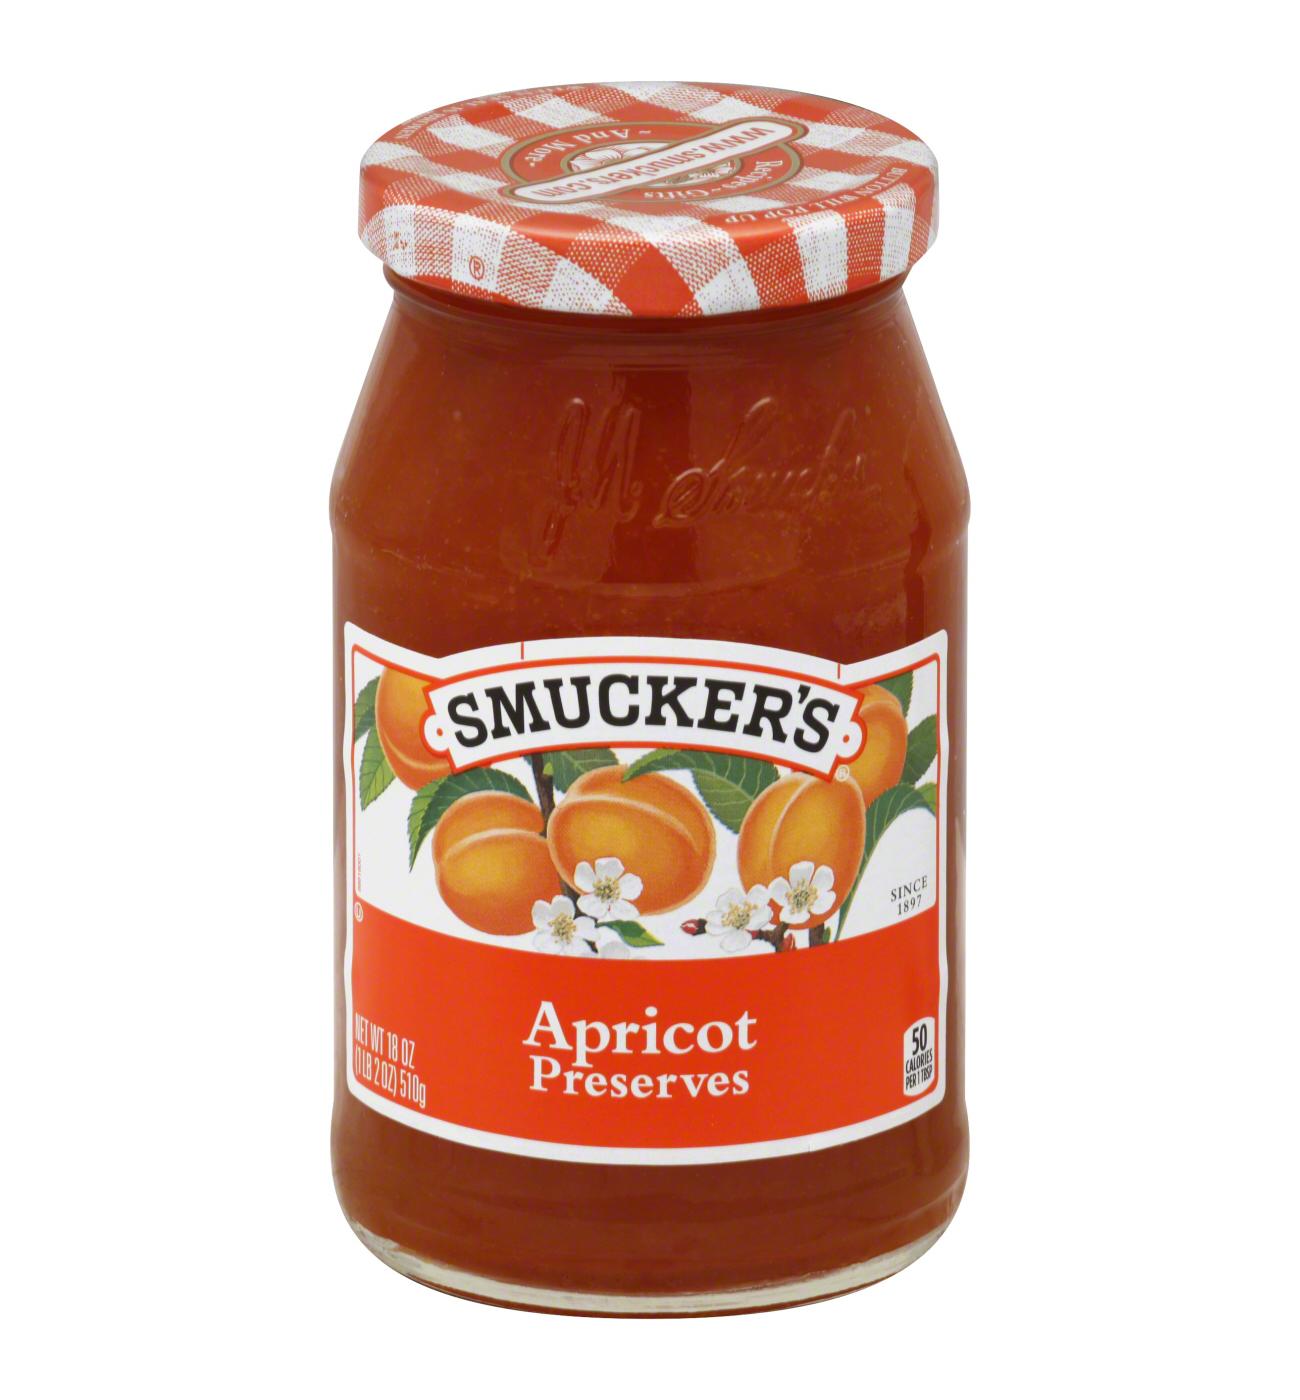 Smucker's Apricot Preserves; image 1 of 2